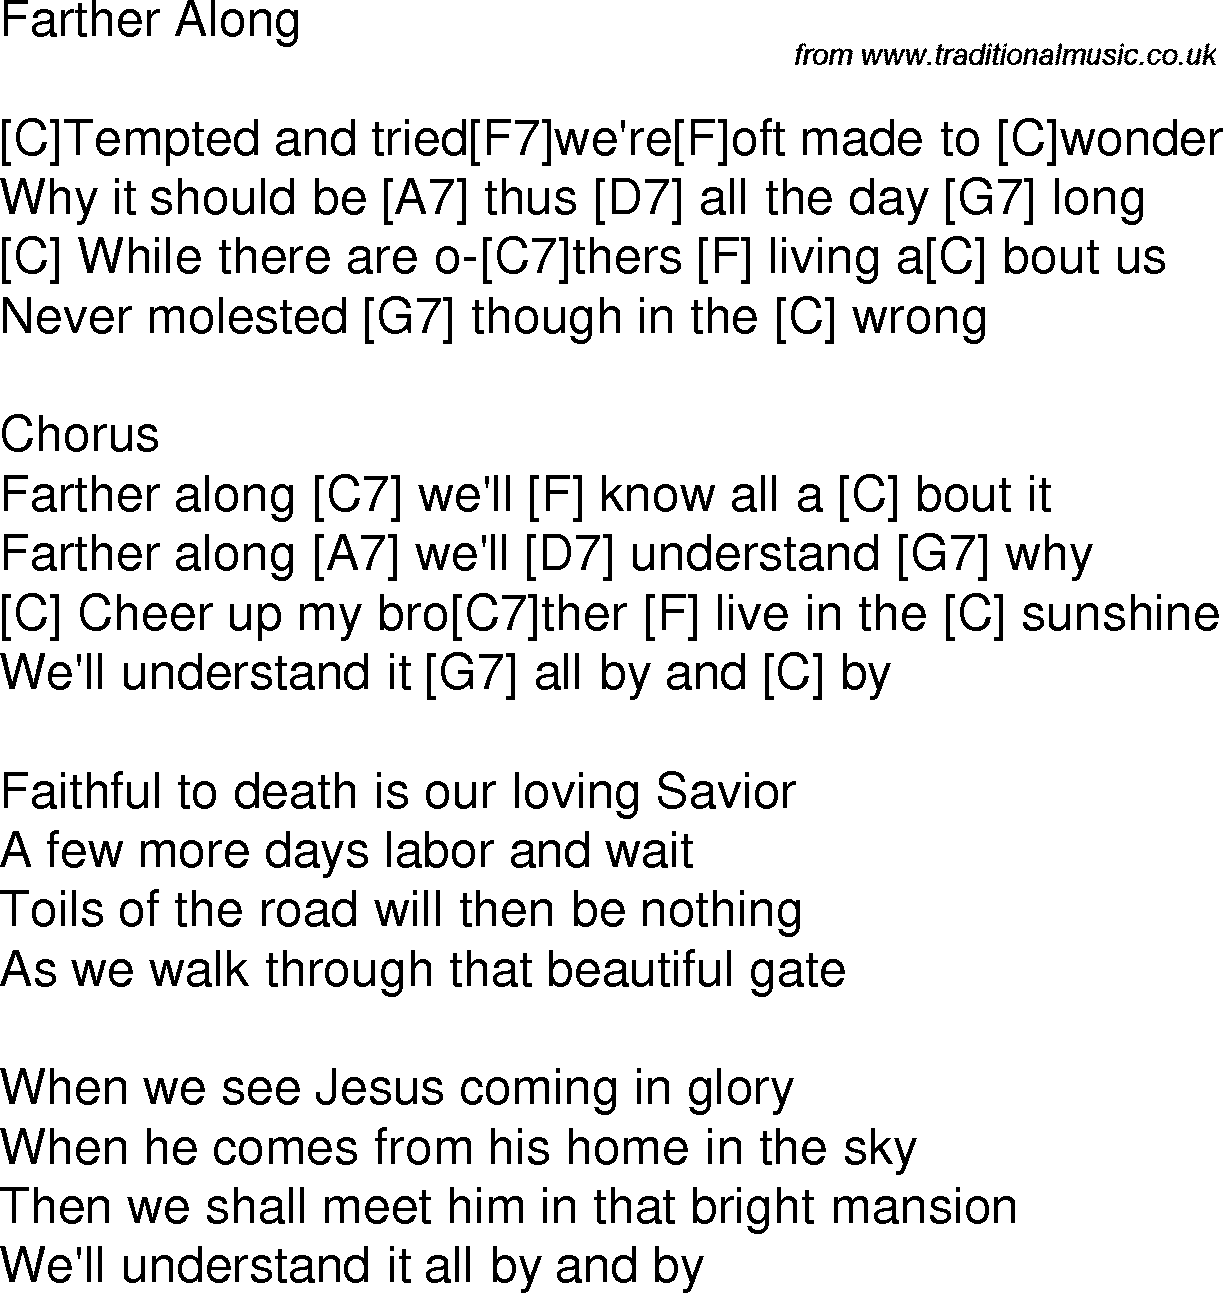 Old time song lyrics with chords for Farther Along C